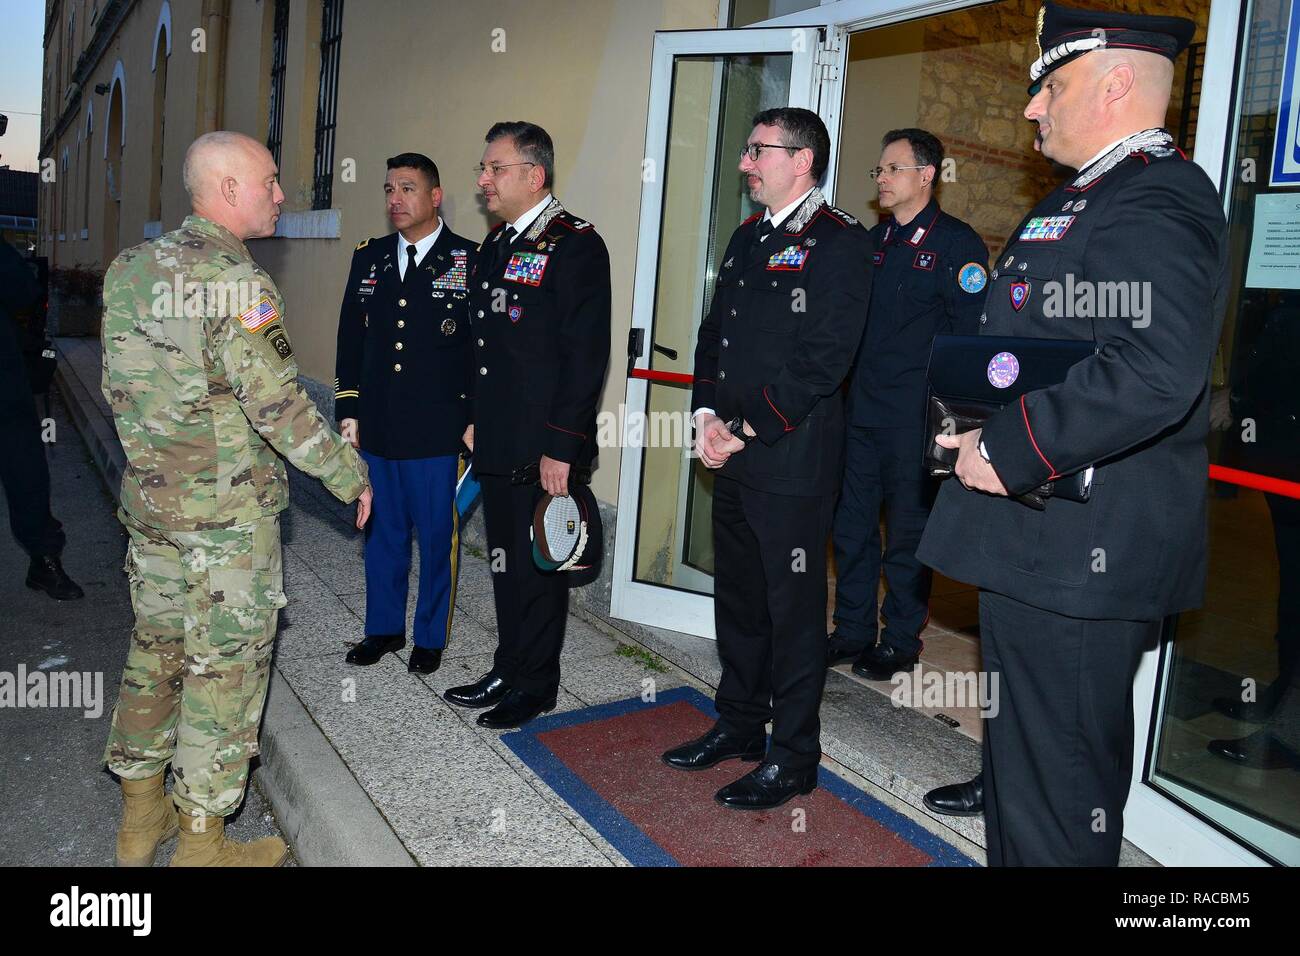 Lt. Gen. Charles D. Luckey (left), Commanding General U.S. Army Reserve Command, thanks for visit at the Center of Excellence for Stability Police Units (CoESPU), at U.S. Army Col. Darius S. Gallegos, (CoESPU) deputy director Brig. Gen. Giovanni Pietro Barbano, (CoESPU) director, Col Pietro Carrozza, (CoESPU),Carabinieri HQ Chief of plans and Military Police and Col Nicola Mangialavori, (CoESPU) Chief of Special Branch Department ,Vicenza, Italy, January 20, 2017. Stock Photo